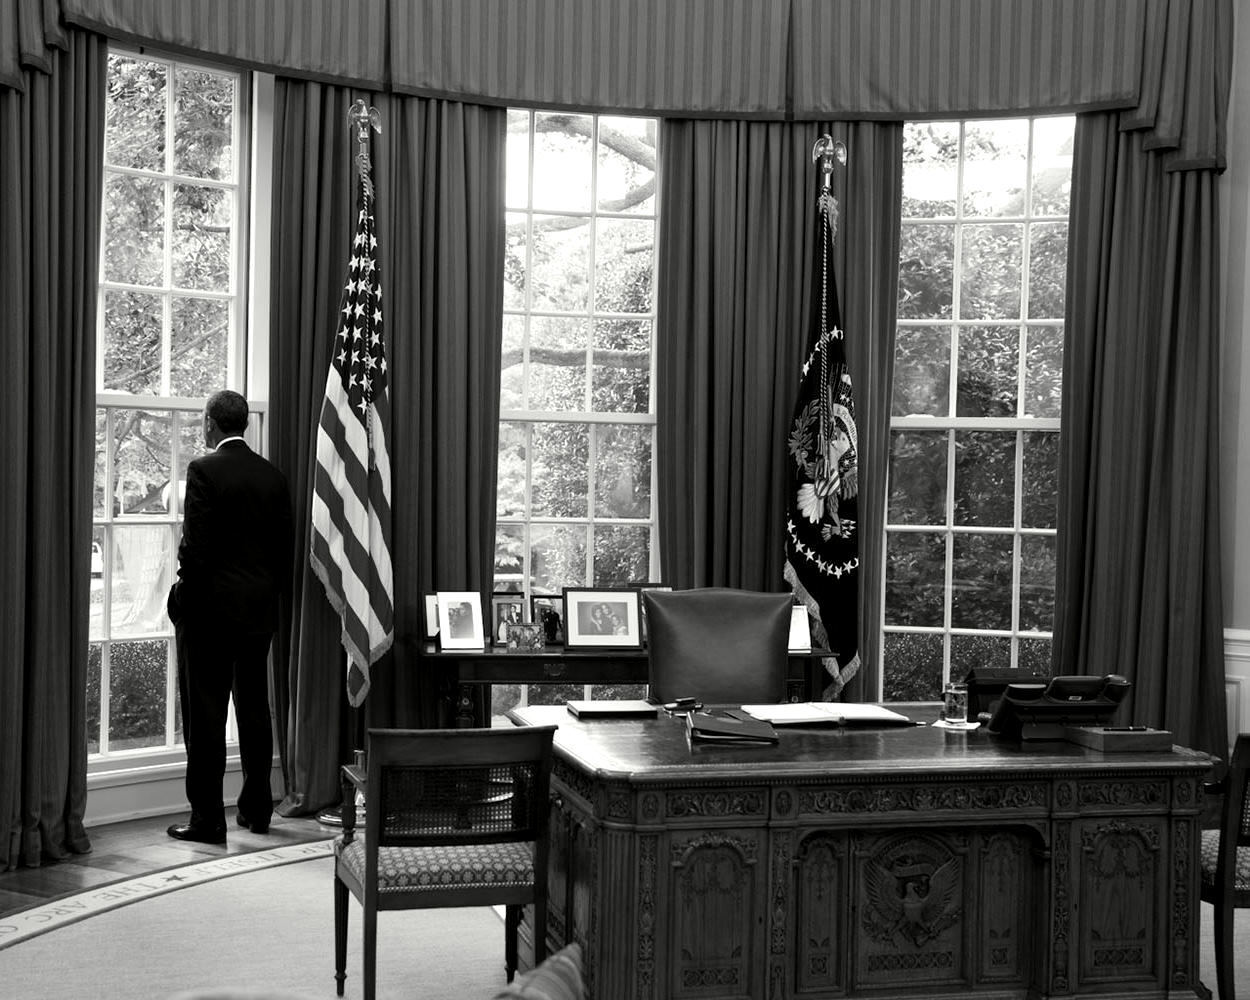 11X14 PHOTO - BARACK OBAMA LOOKS OUT WINDOW OF OVAL OFFICE (LG-088)